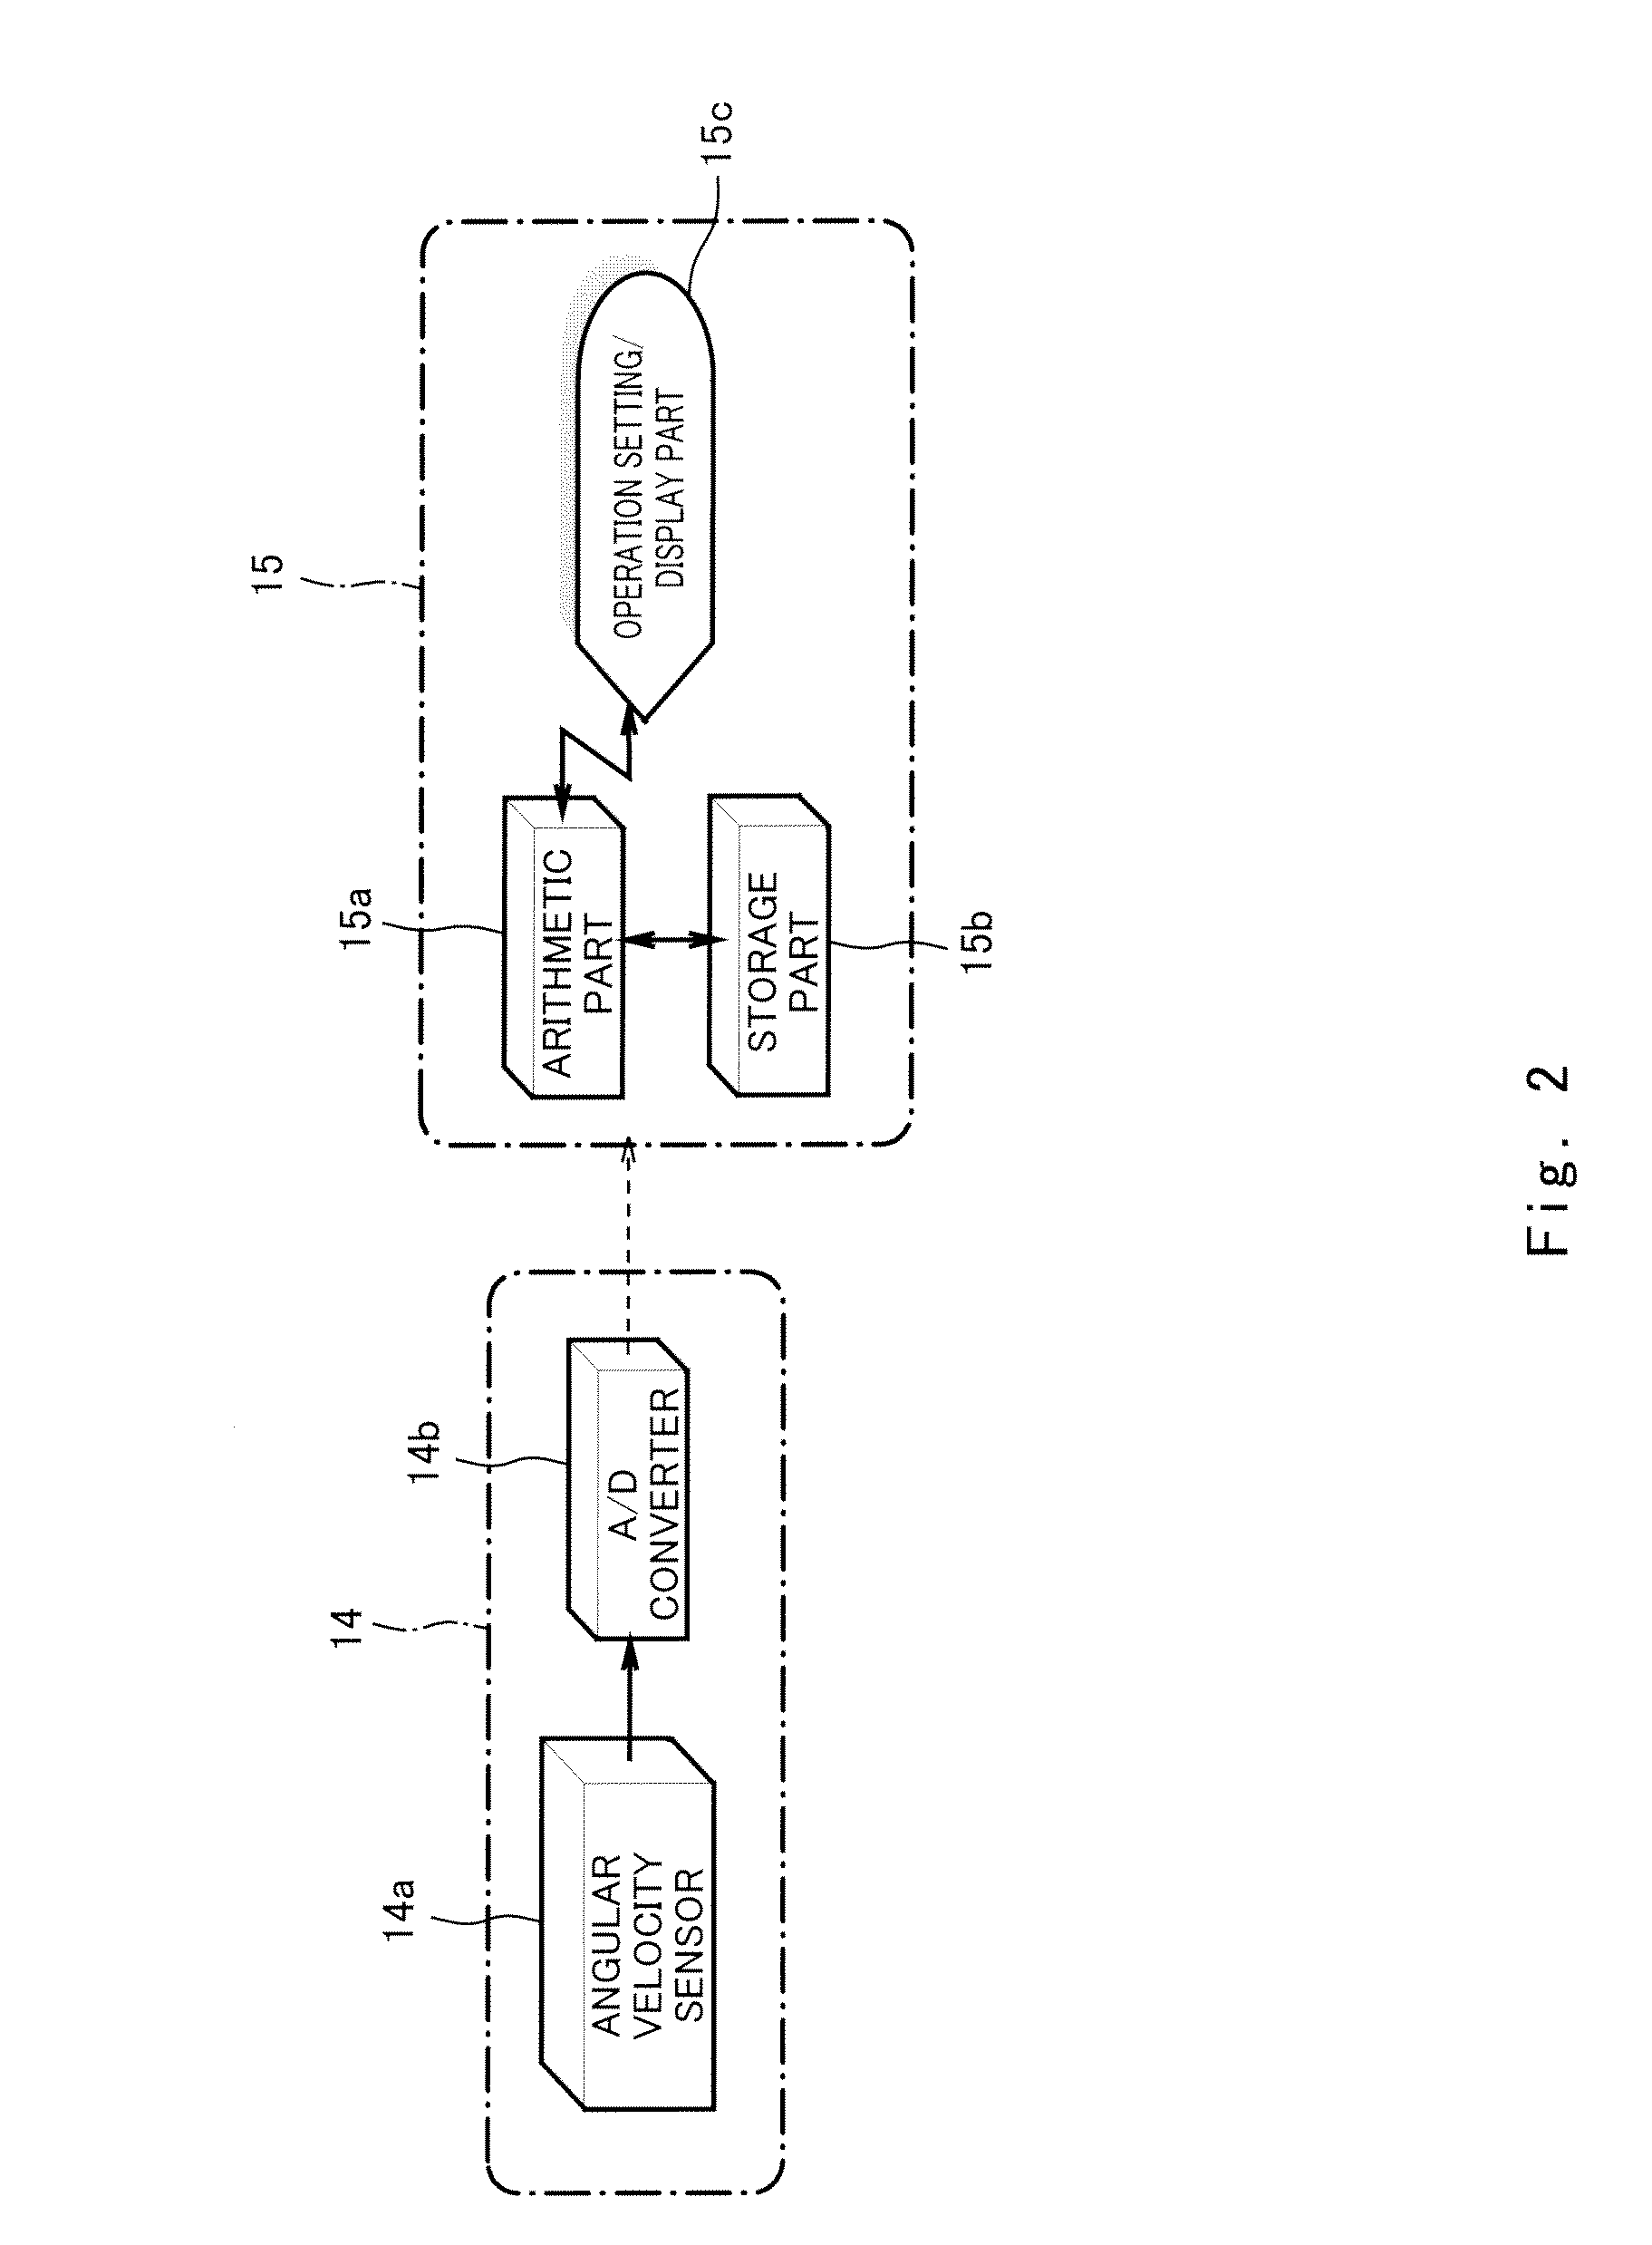 Center-of-Gravity Detection System, Lateral Rollover Limit Velocity Estimation System, and Cargo Weight Estimation System